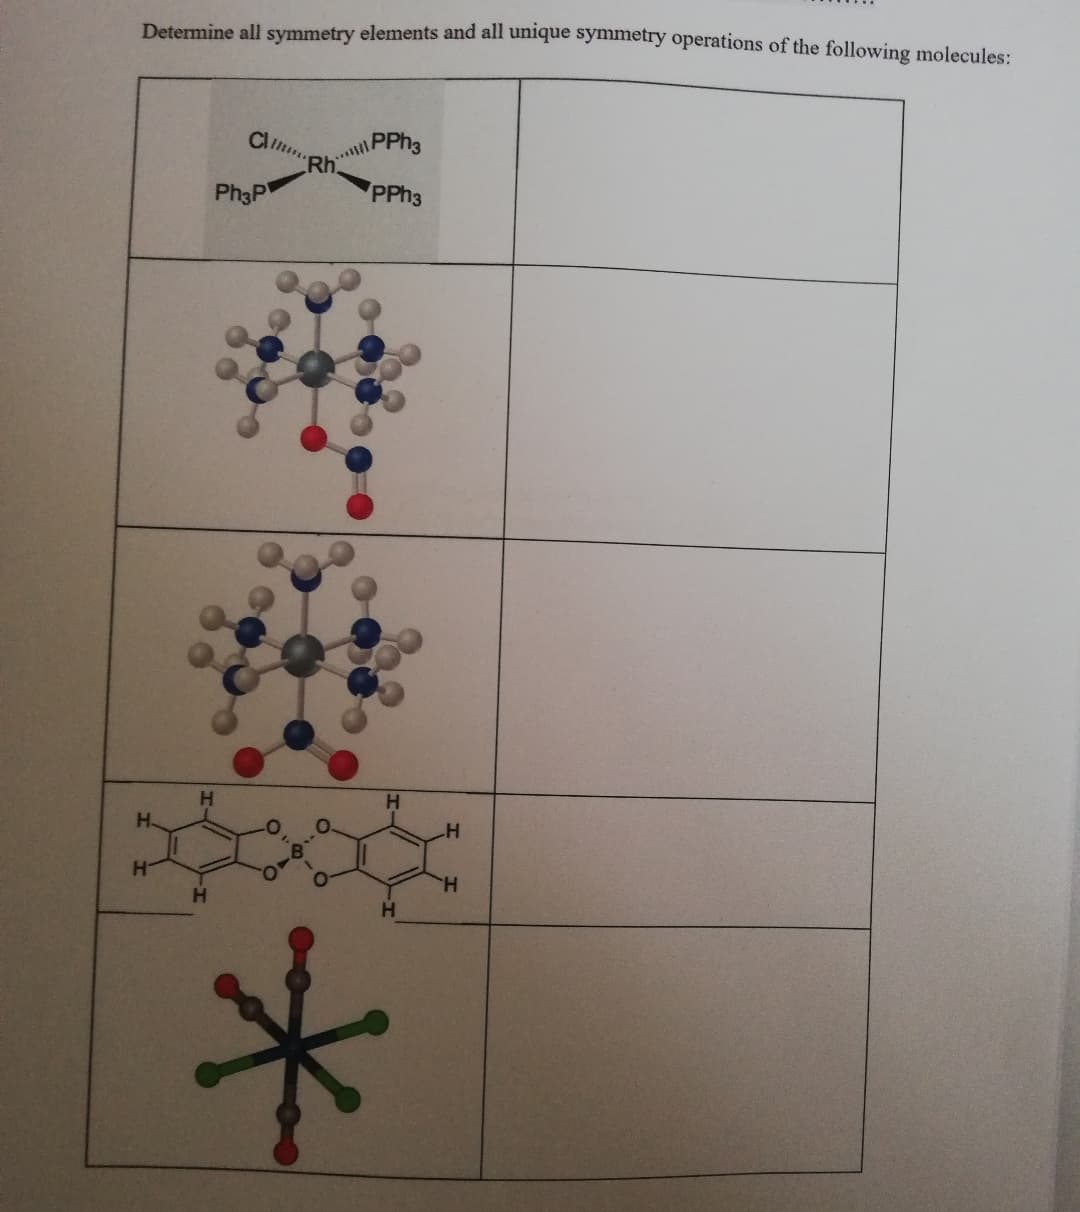 Determine all symmetry elements and all unique symmetry operations of the following molecules:
CRh.
PPh3
PPh3
Ph3P
H
H
H
H
H
H
H
*